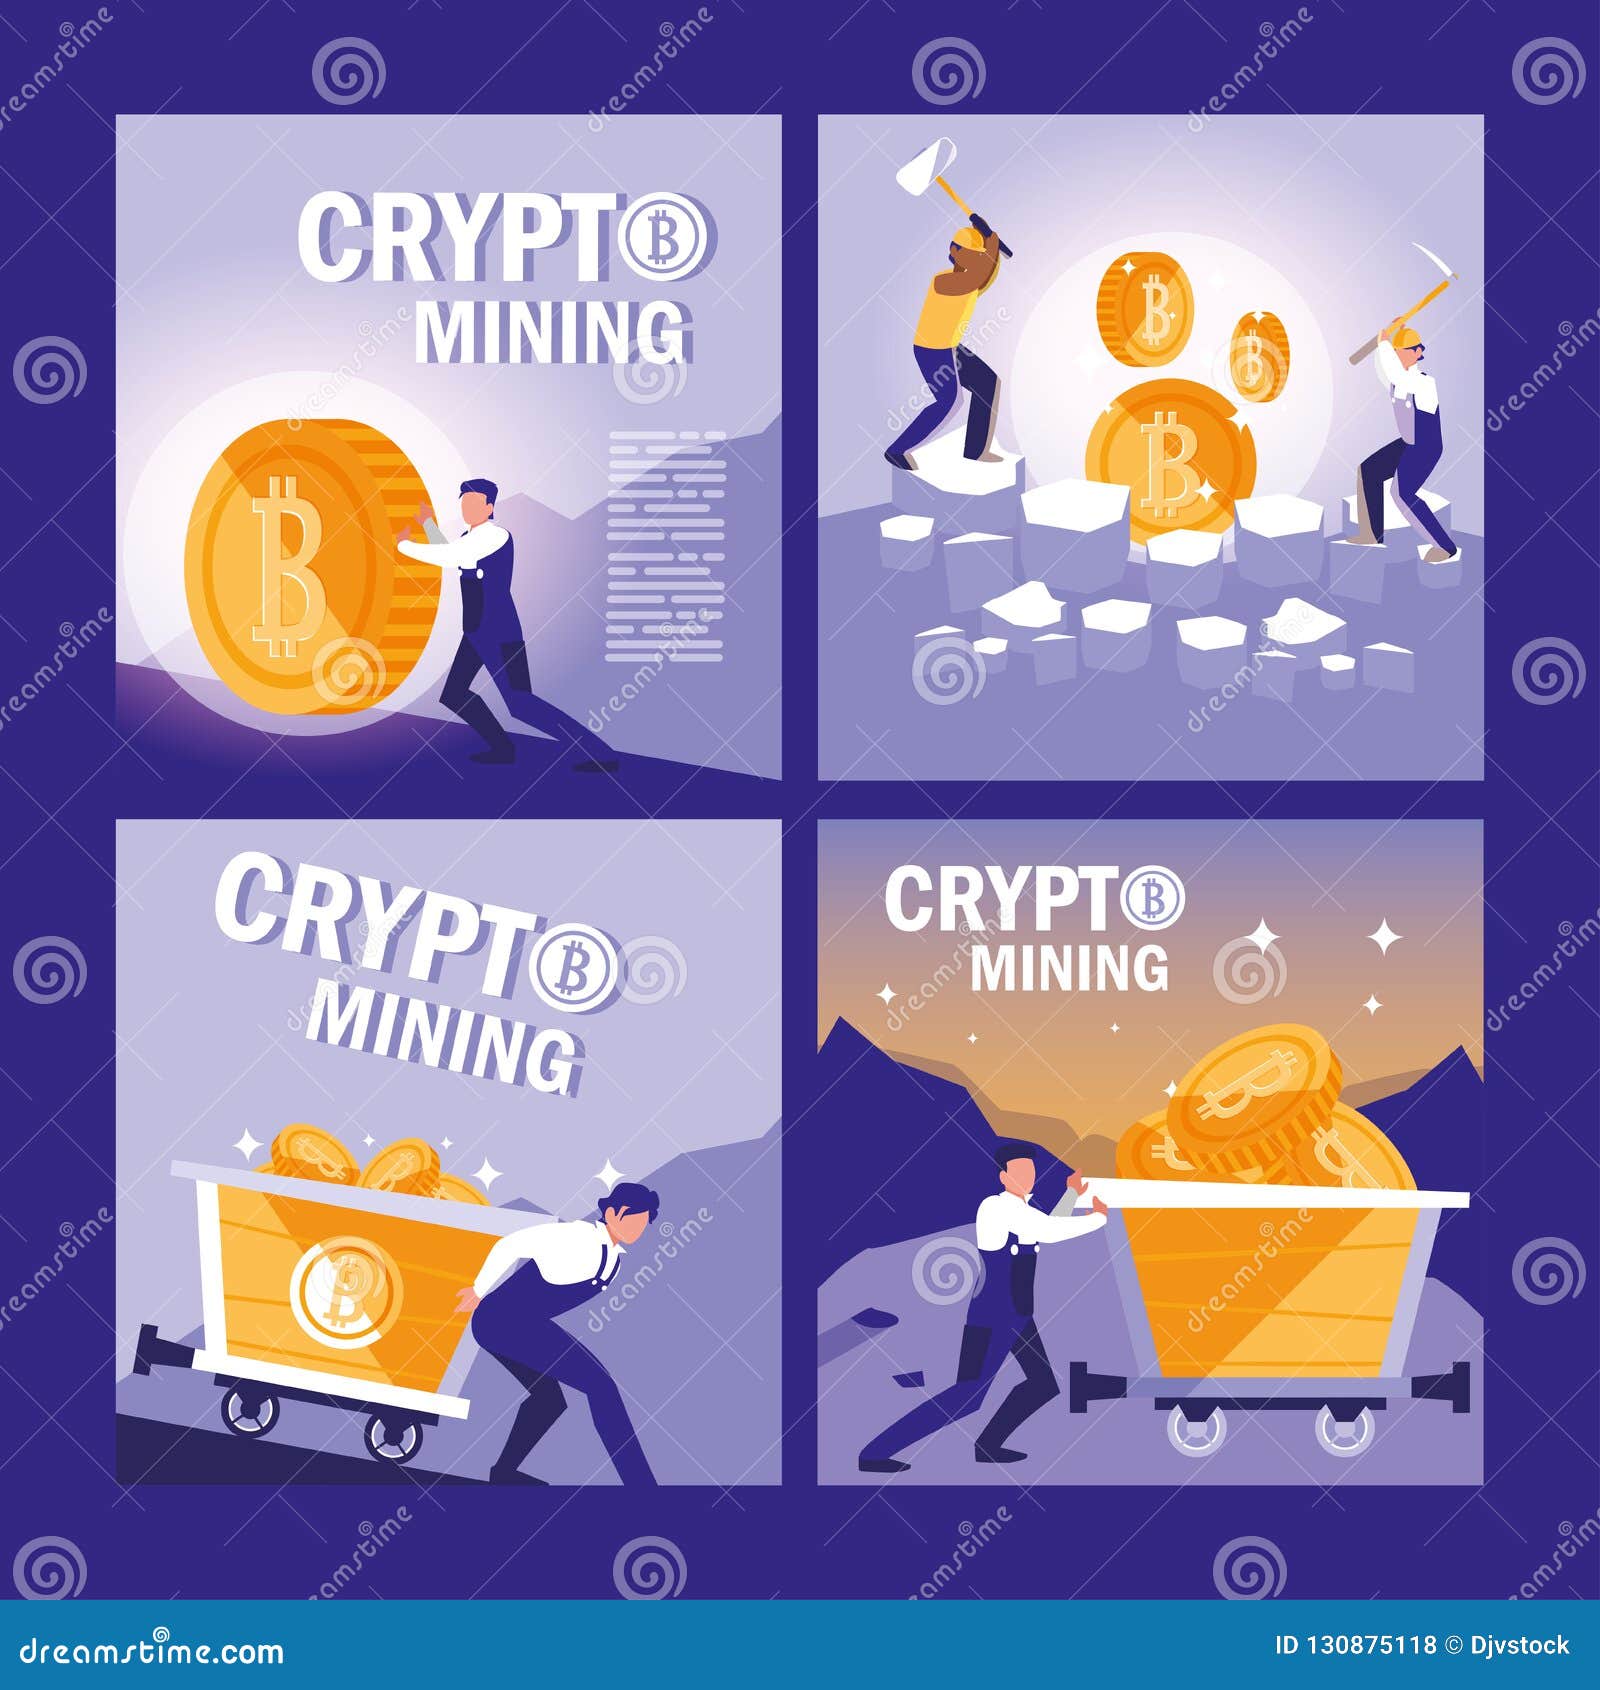 set of teamworkers crypto mining bitcoins